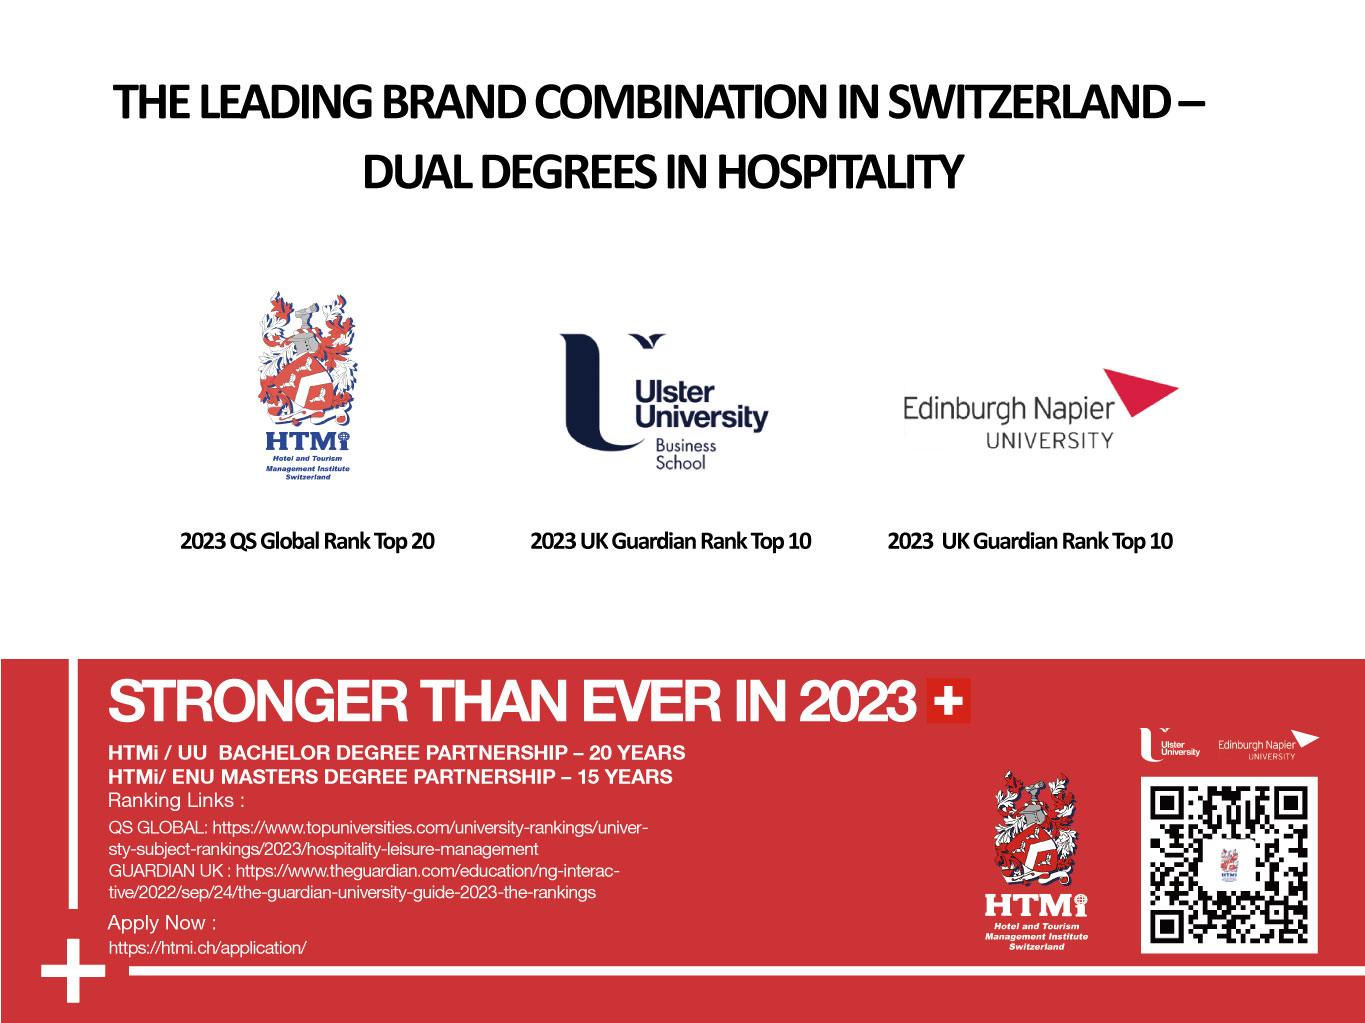 The Leading Brand Combination in Switzerland - Dual Degrees in Hospitality